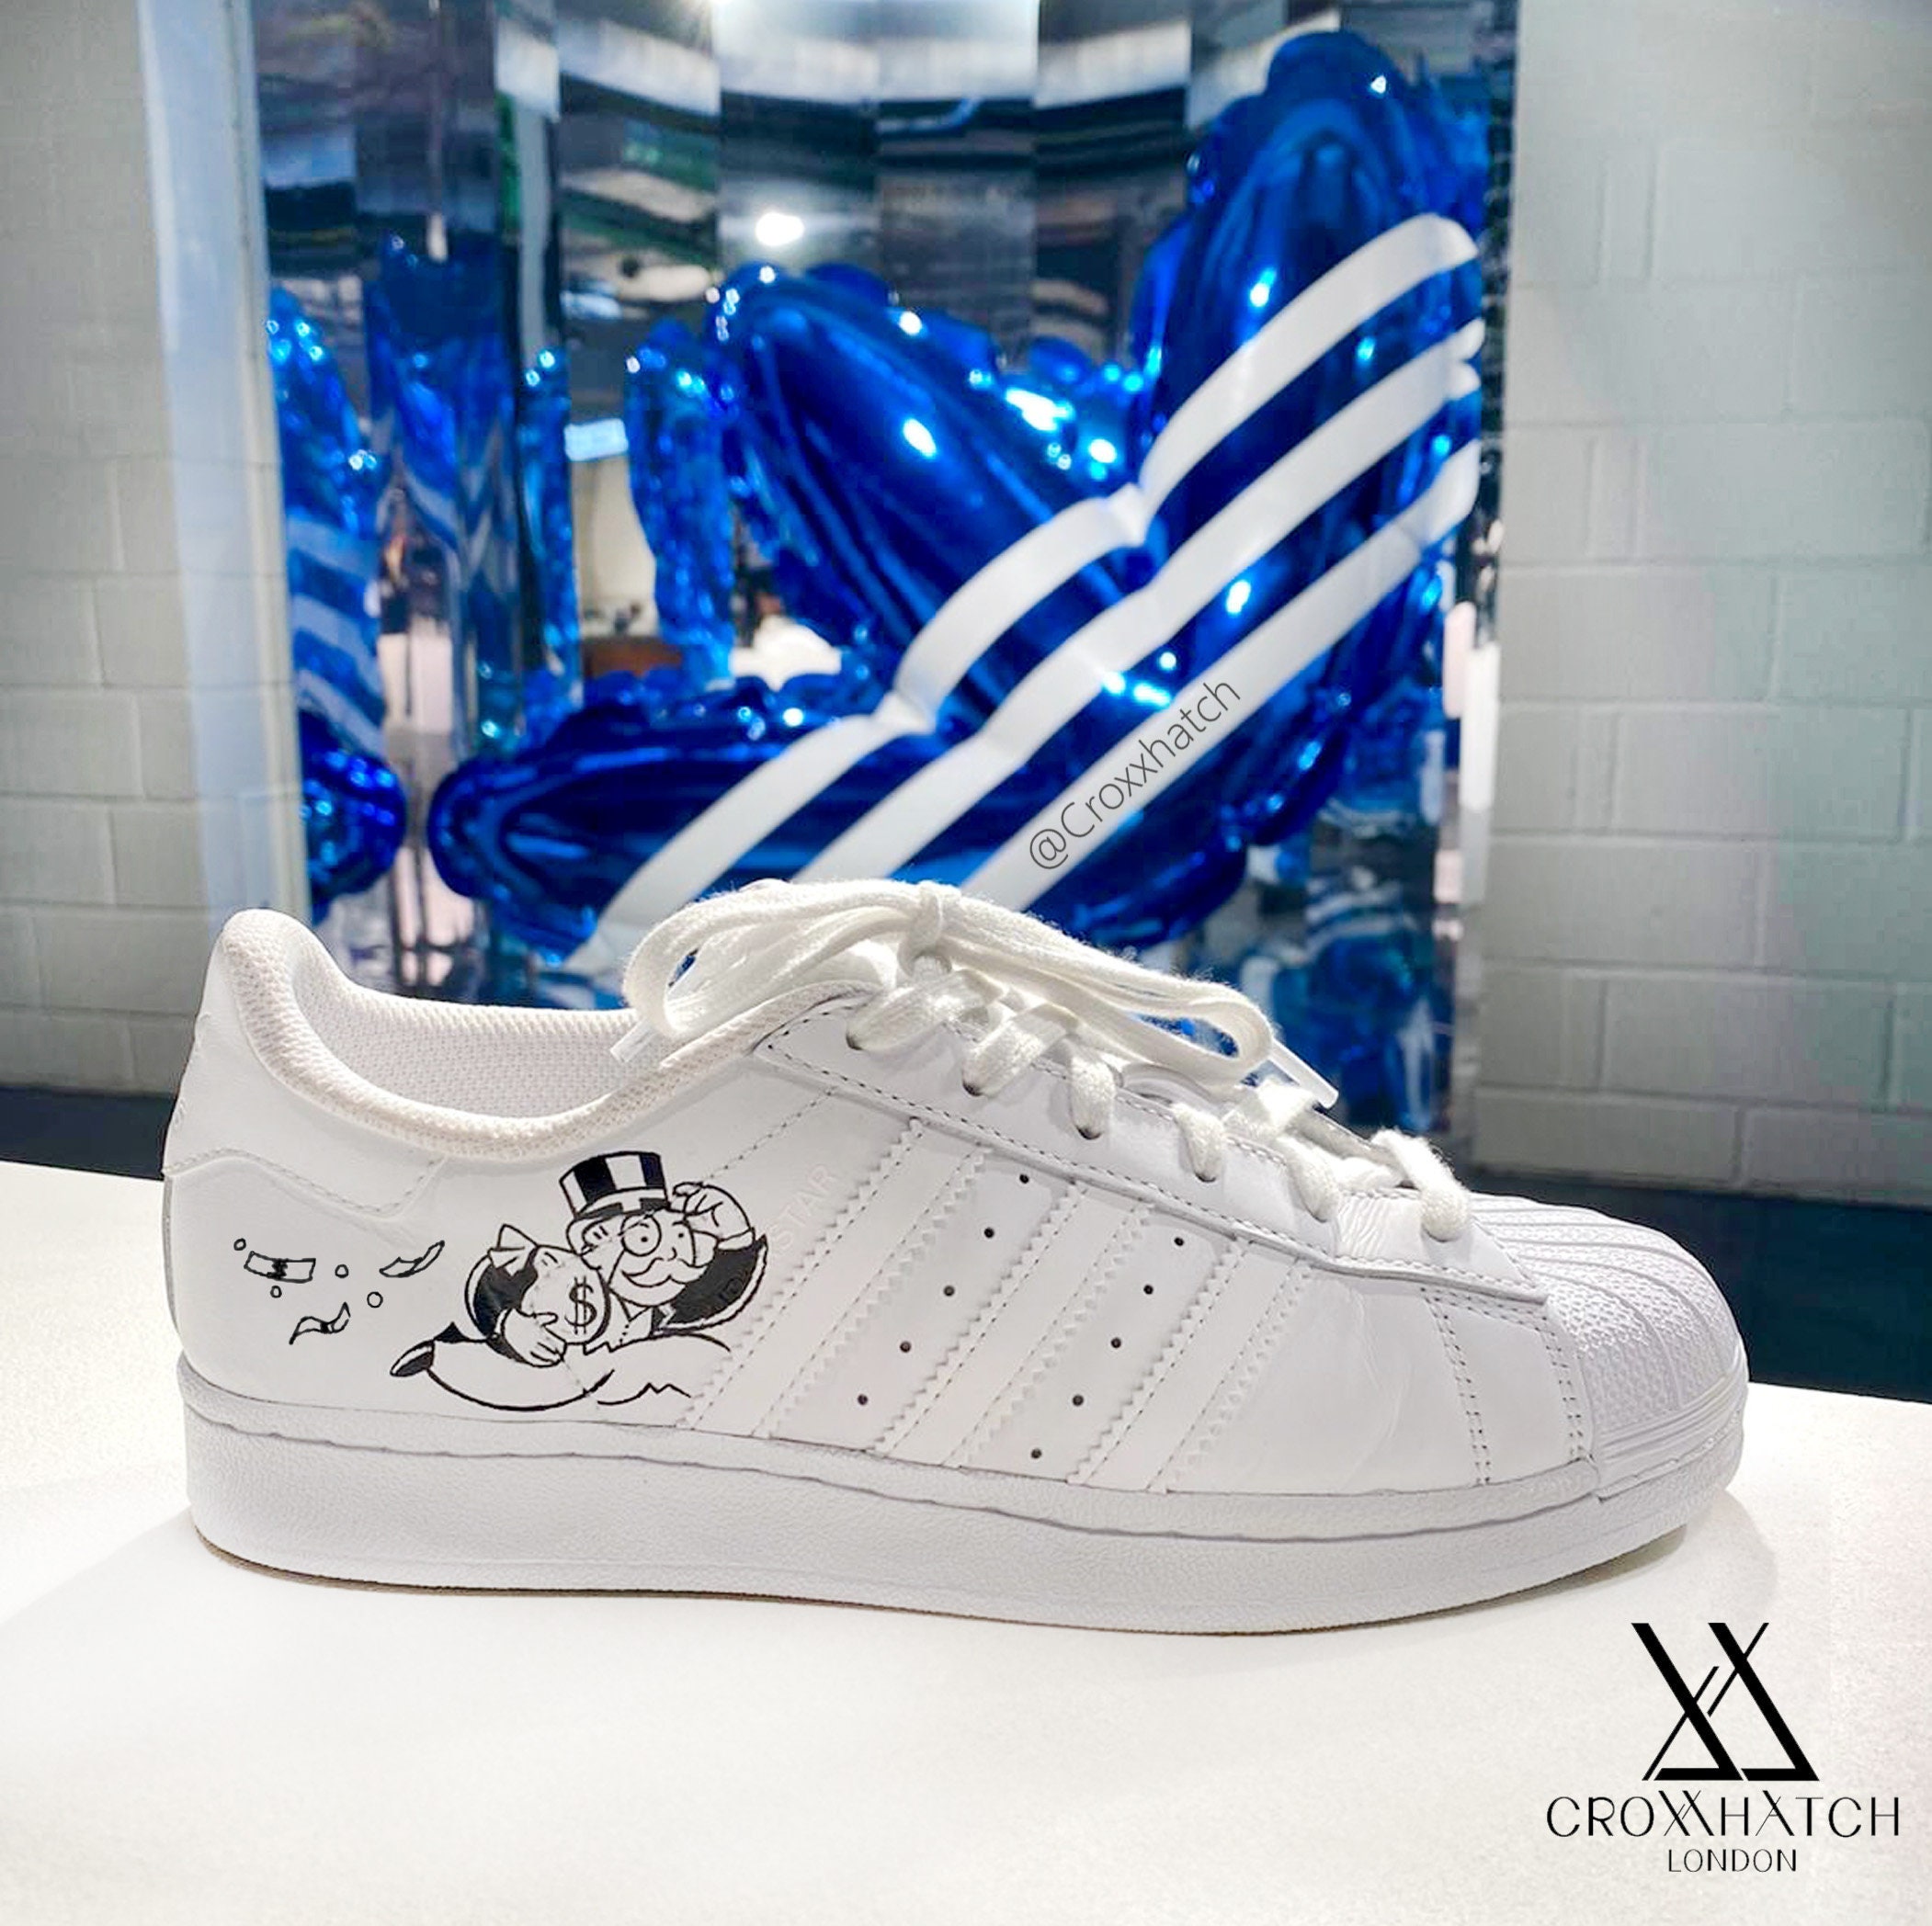 Women's Adidas Superstar  Custom shoes diy, Adidas painted shoes